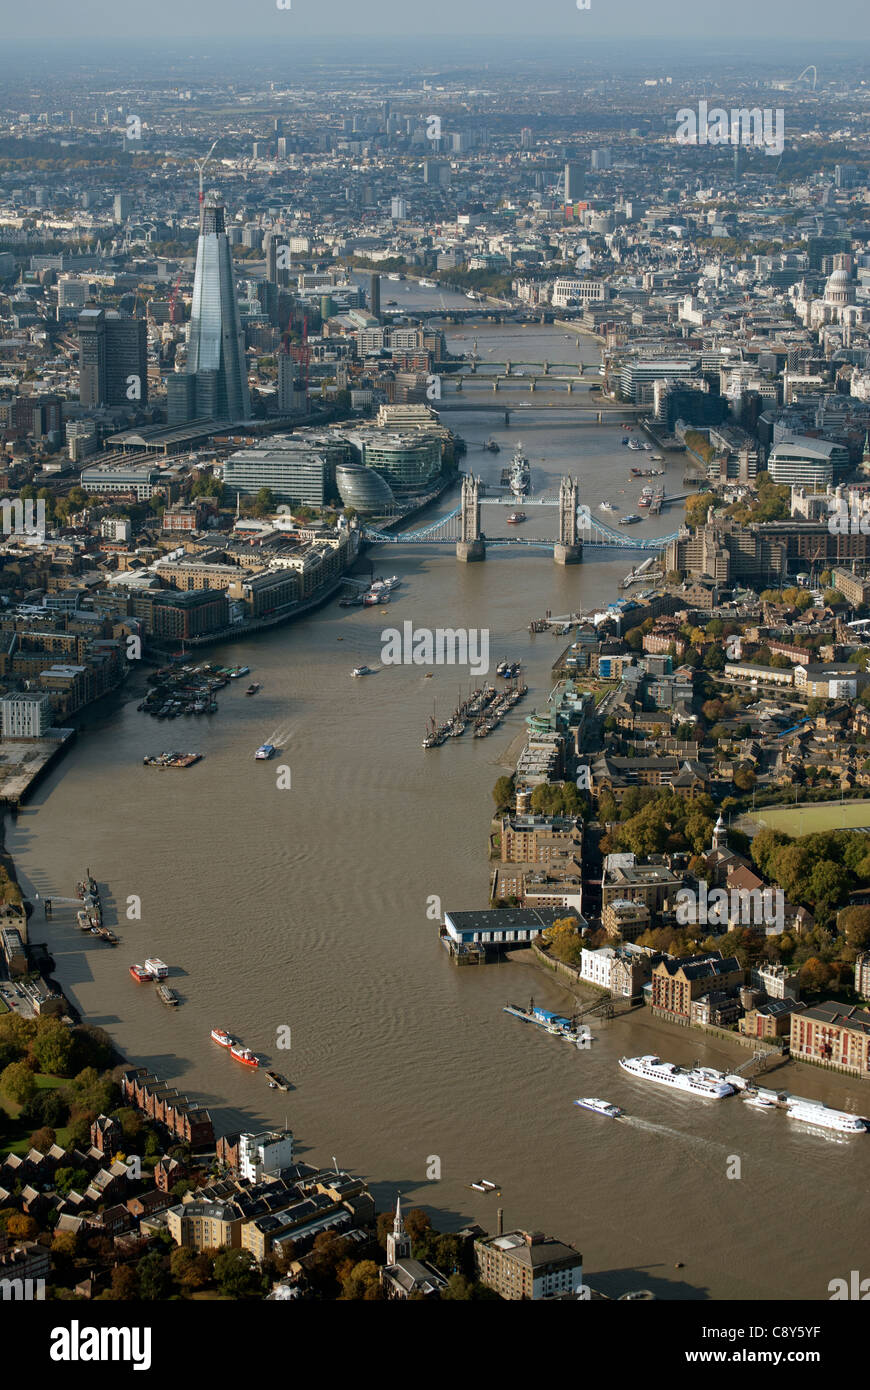 The River Thames with Tower Bridge in London England UK from the air. Stock Photo